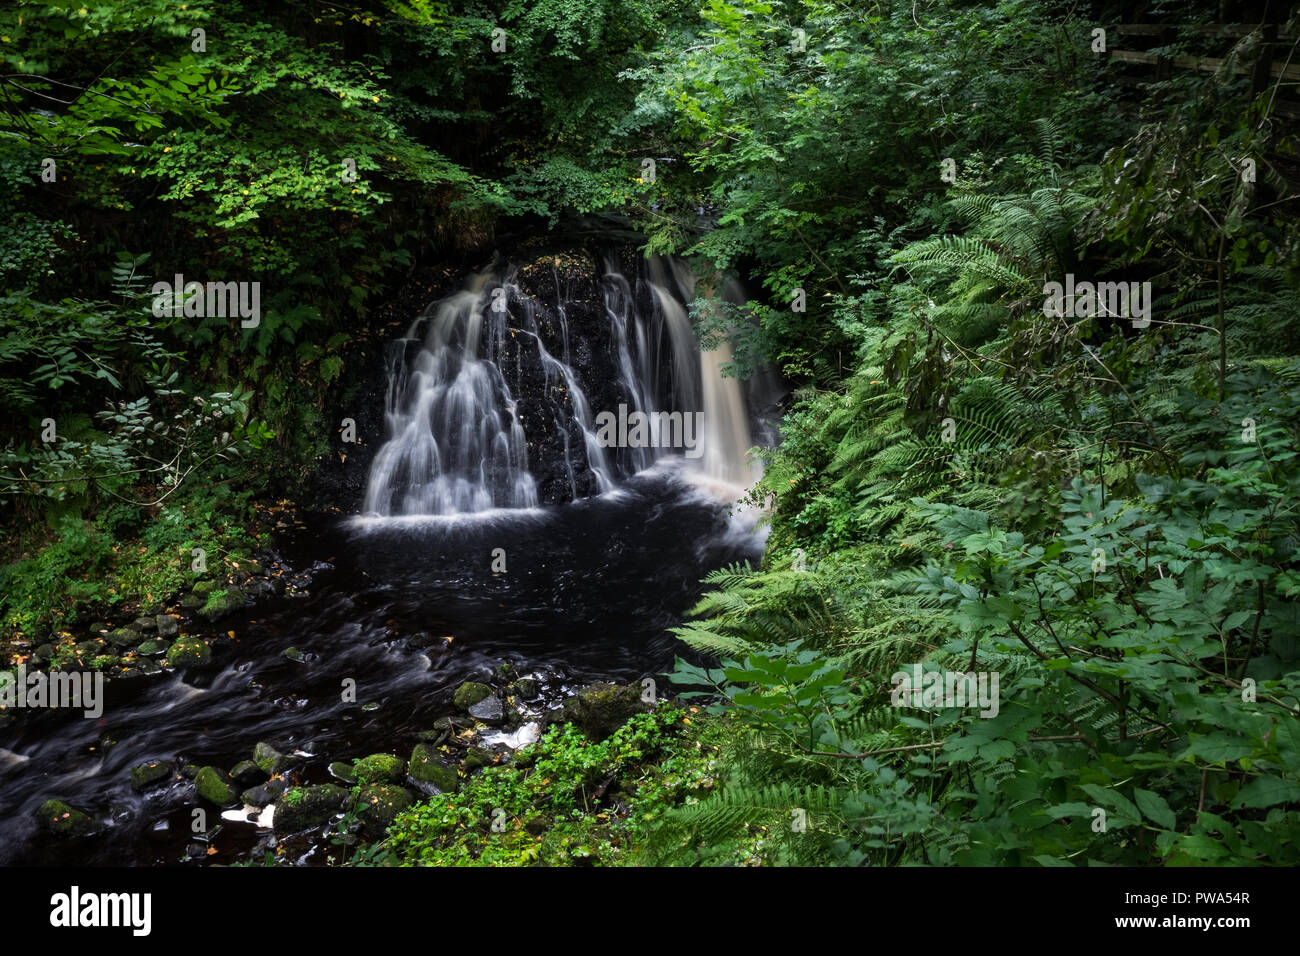 Waterfall Trail at Glenariff Forest Park near Causeway Coastal Route, Country of Antrim, Northern Ireland. Stock Photo